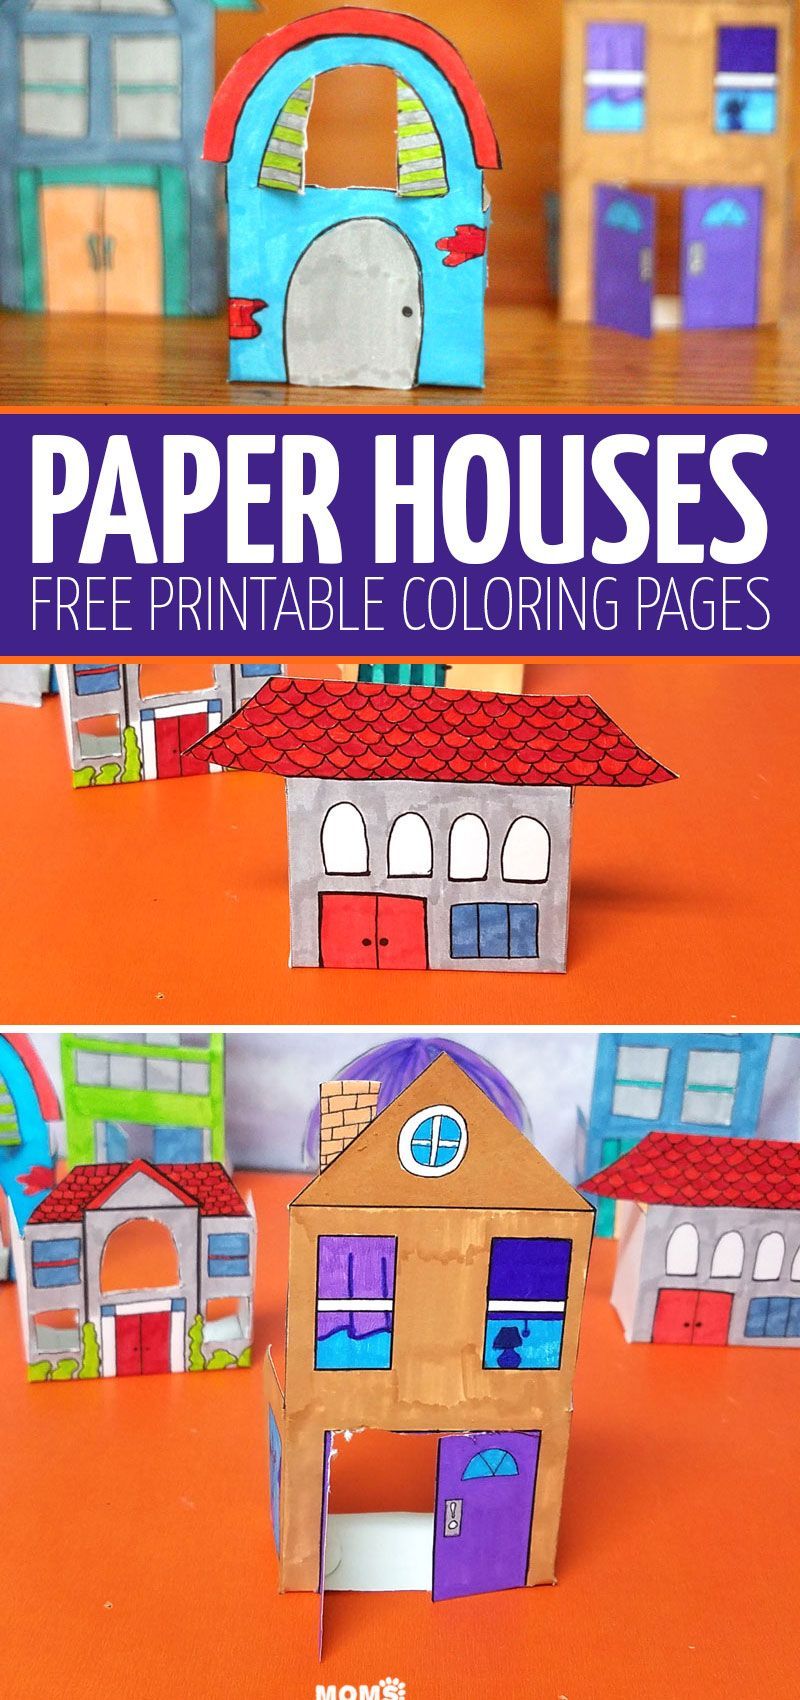 Print and Craft some Paper Houses - Print and Craft some Paper Houses -   19 diy Paper toy ideas